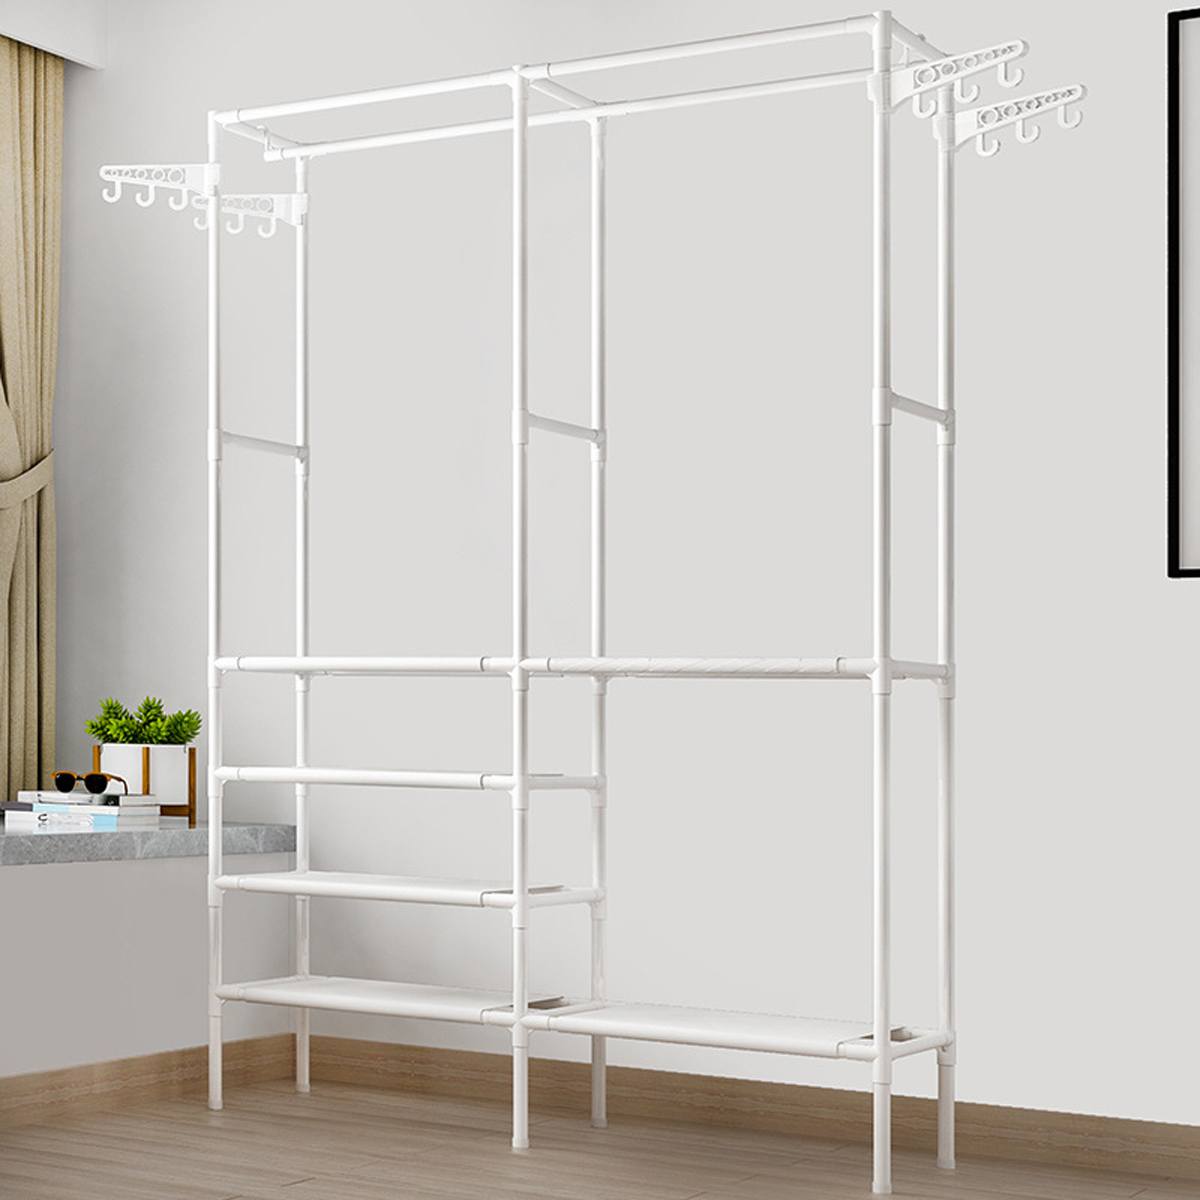 Clothes Rack Floor Standing Clothes Hanging Colorful Storage Shelf Clothes Hanger Racks Couple Simple Style Bedroom Furniture